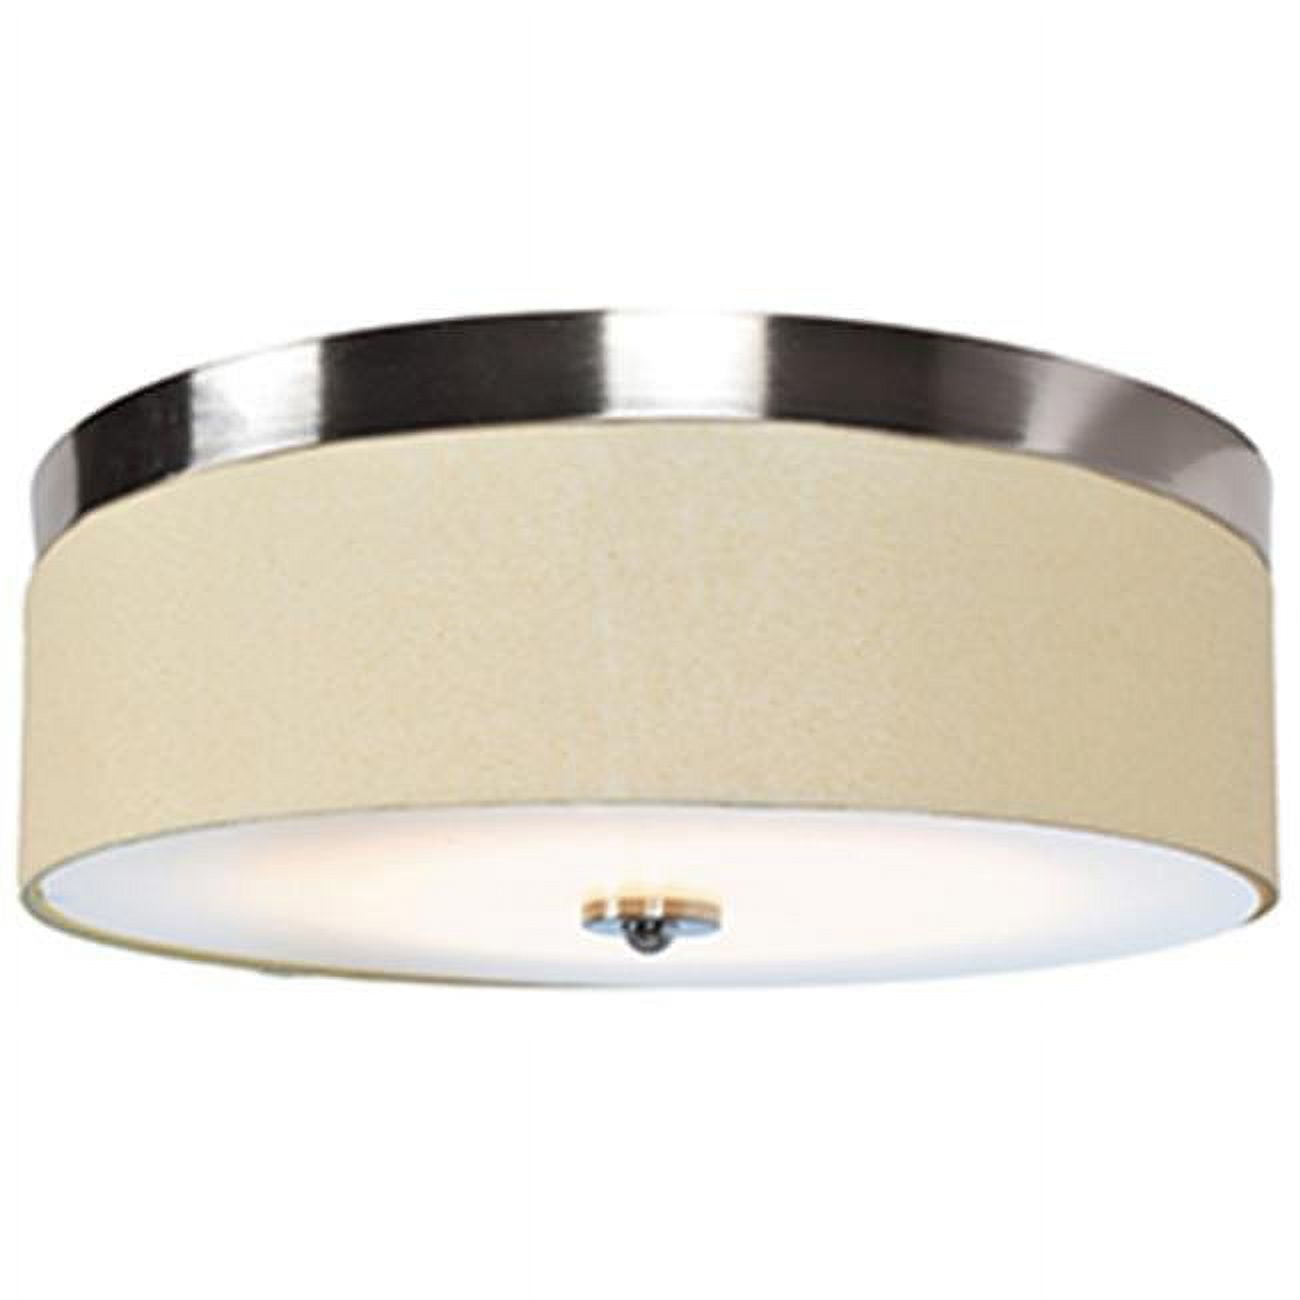 20821ledd-bs-acr 5.25 X 18 In. Mia Led Flush Mount With Fabric Shade, Brushed Steel & Acrylic Lens